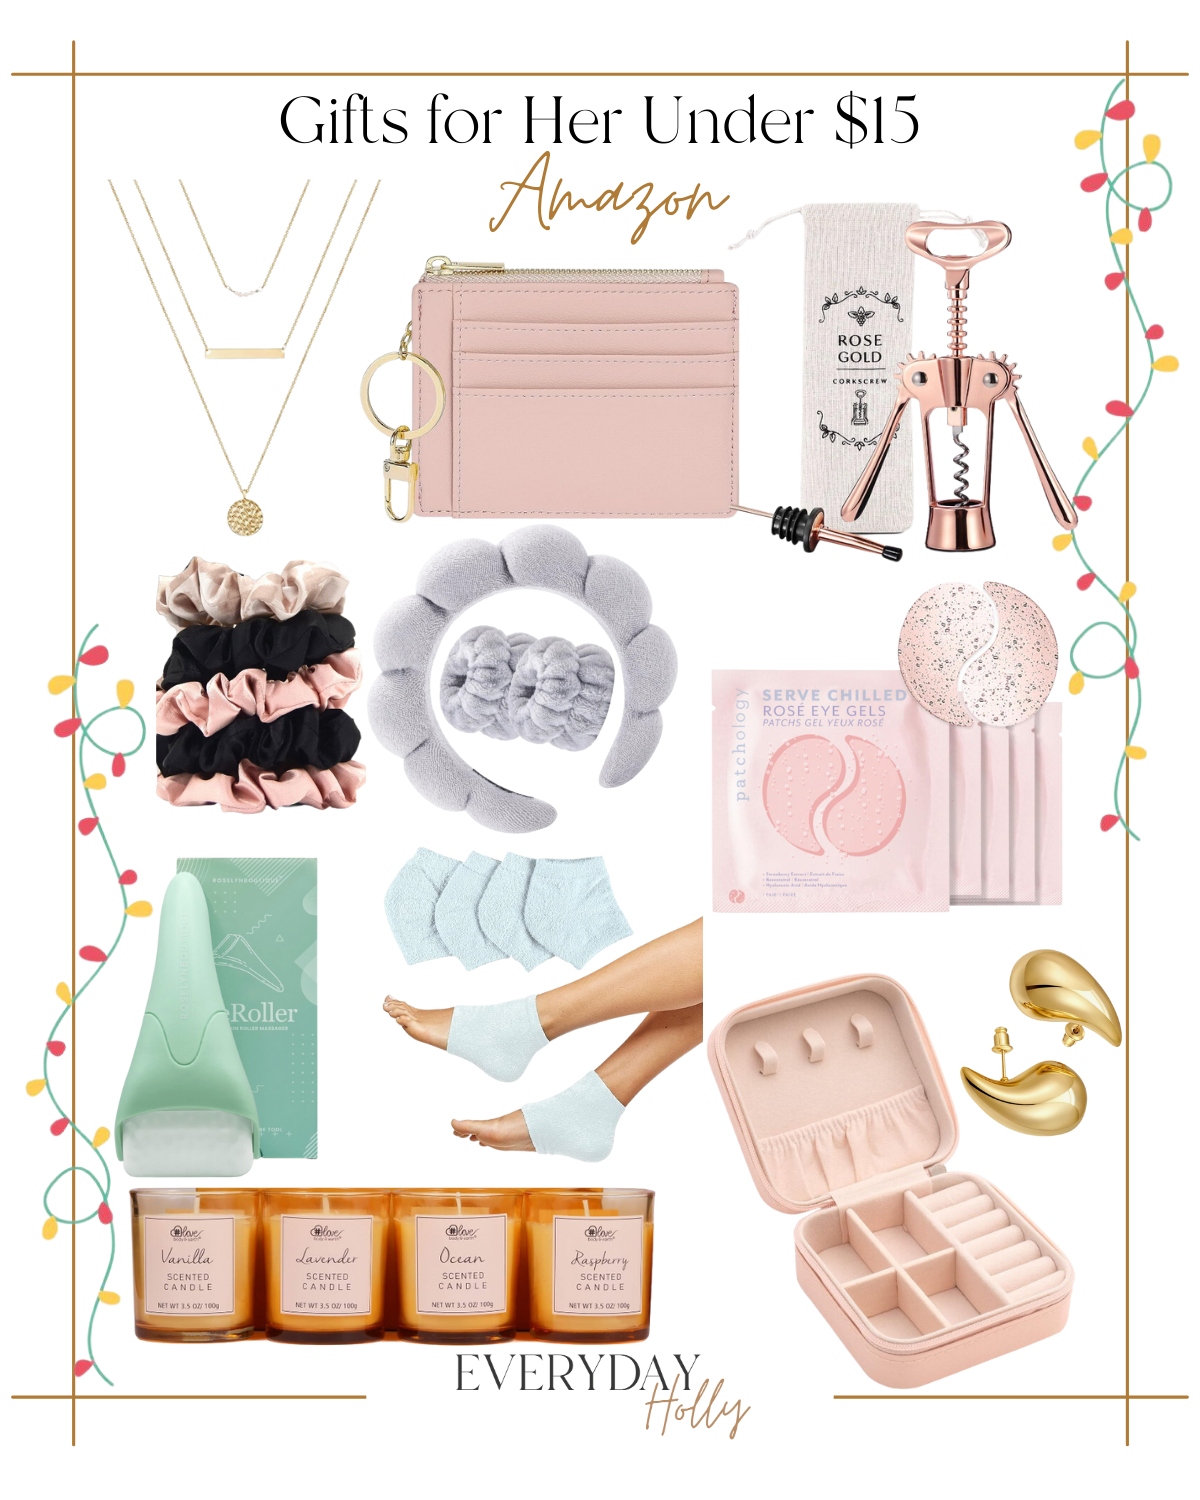 10 Holiday Gift Guides for Everyone This Season | #holiday #giftguide #giftideas #2023 #christmas #gifts #amazon #giftsunder$15 #jewelry #wallet #wineopener #iceroller #beauty #skincare #beauty #scrunchies #satin #earrings #candle #travel